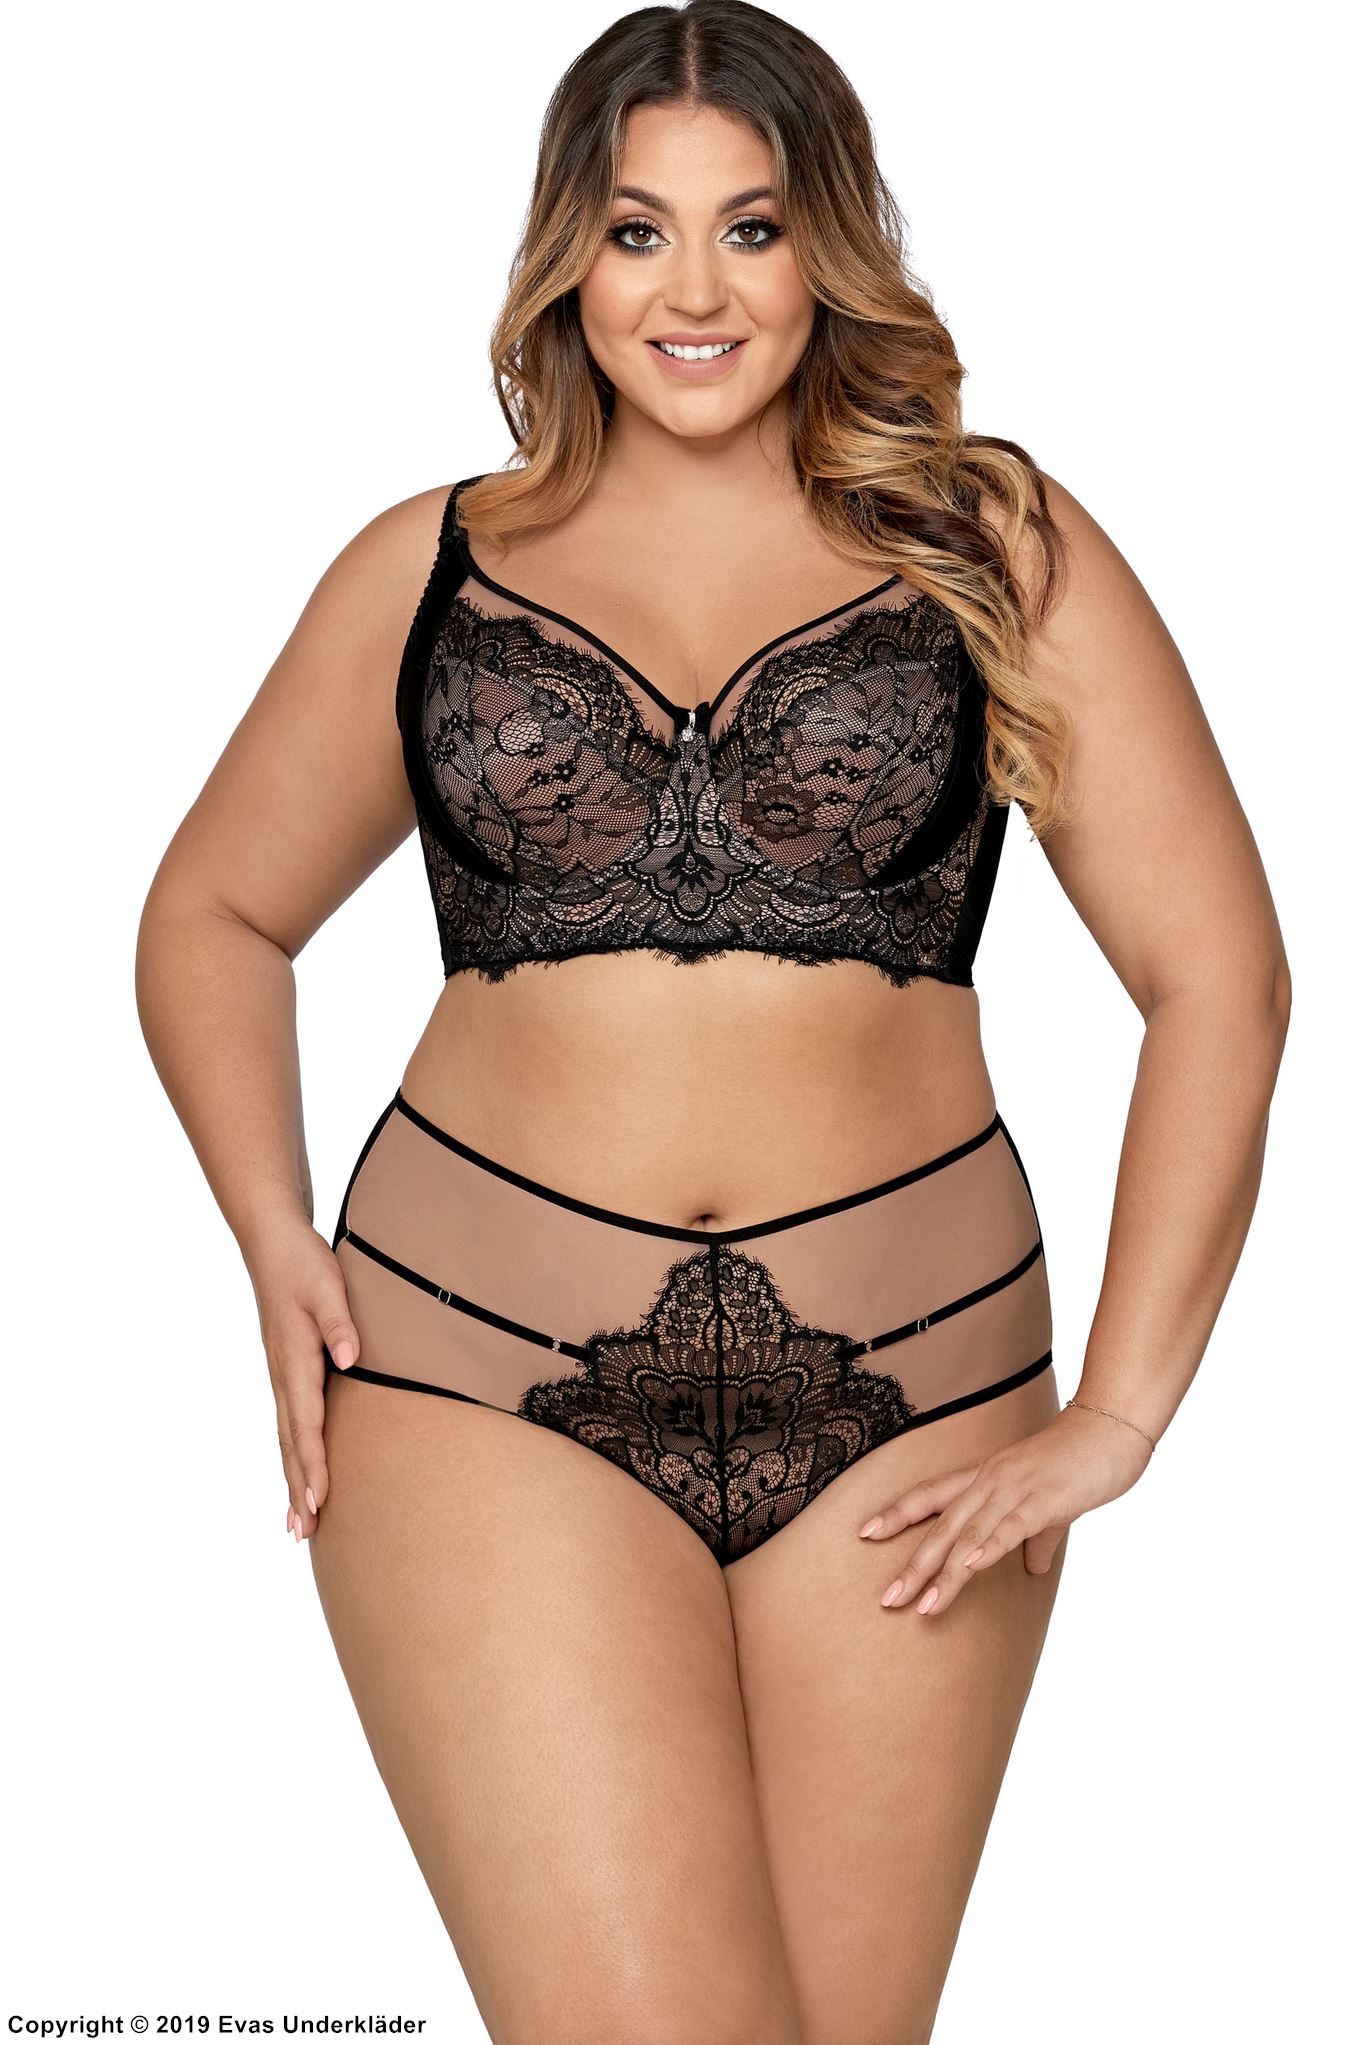 Soft longline bra, lace overlay, straps over bust, B to J-cup